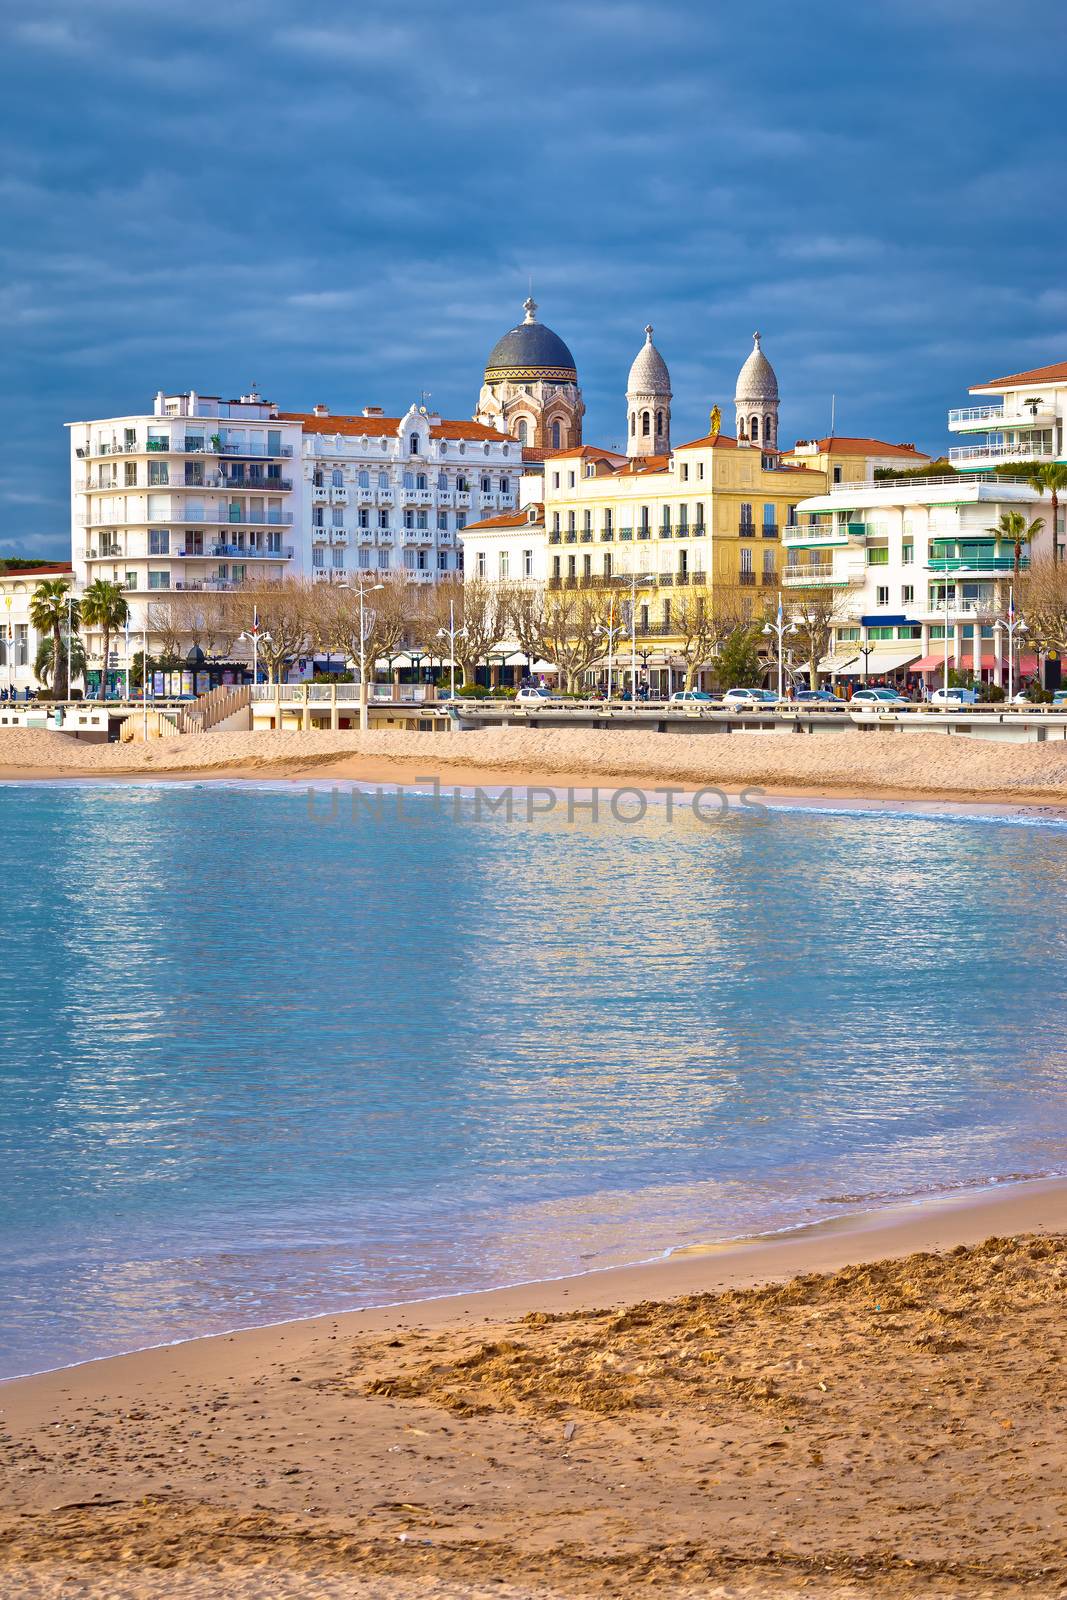 Saint Raphael beach and waterfront view, famous tourist destination of French riviera, Alpes Maritimes region of France